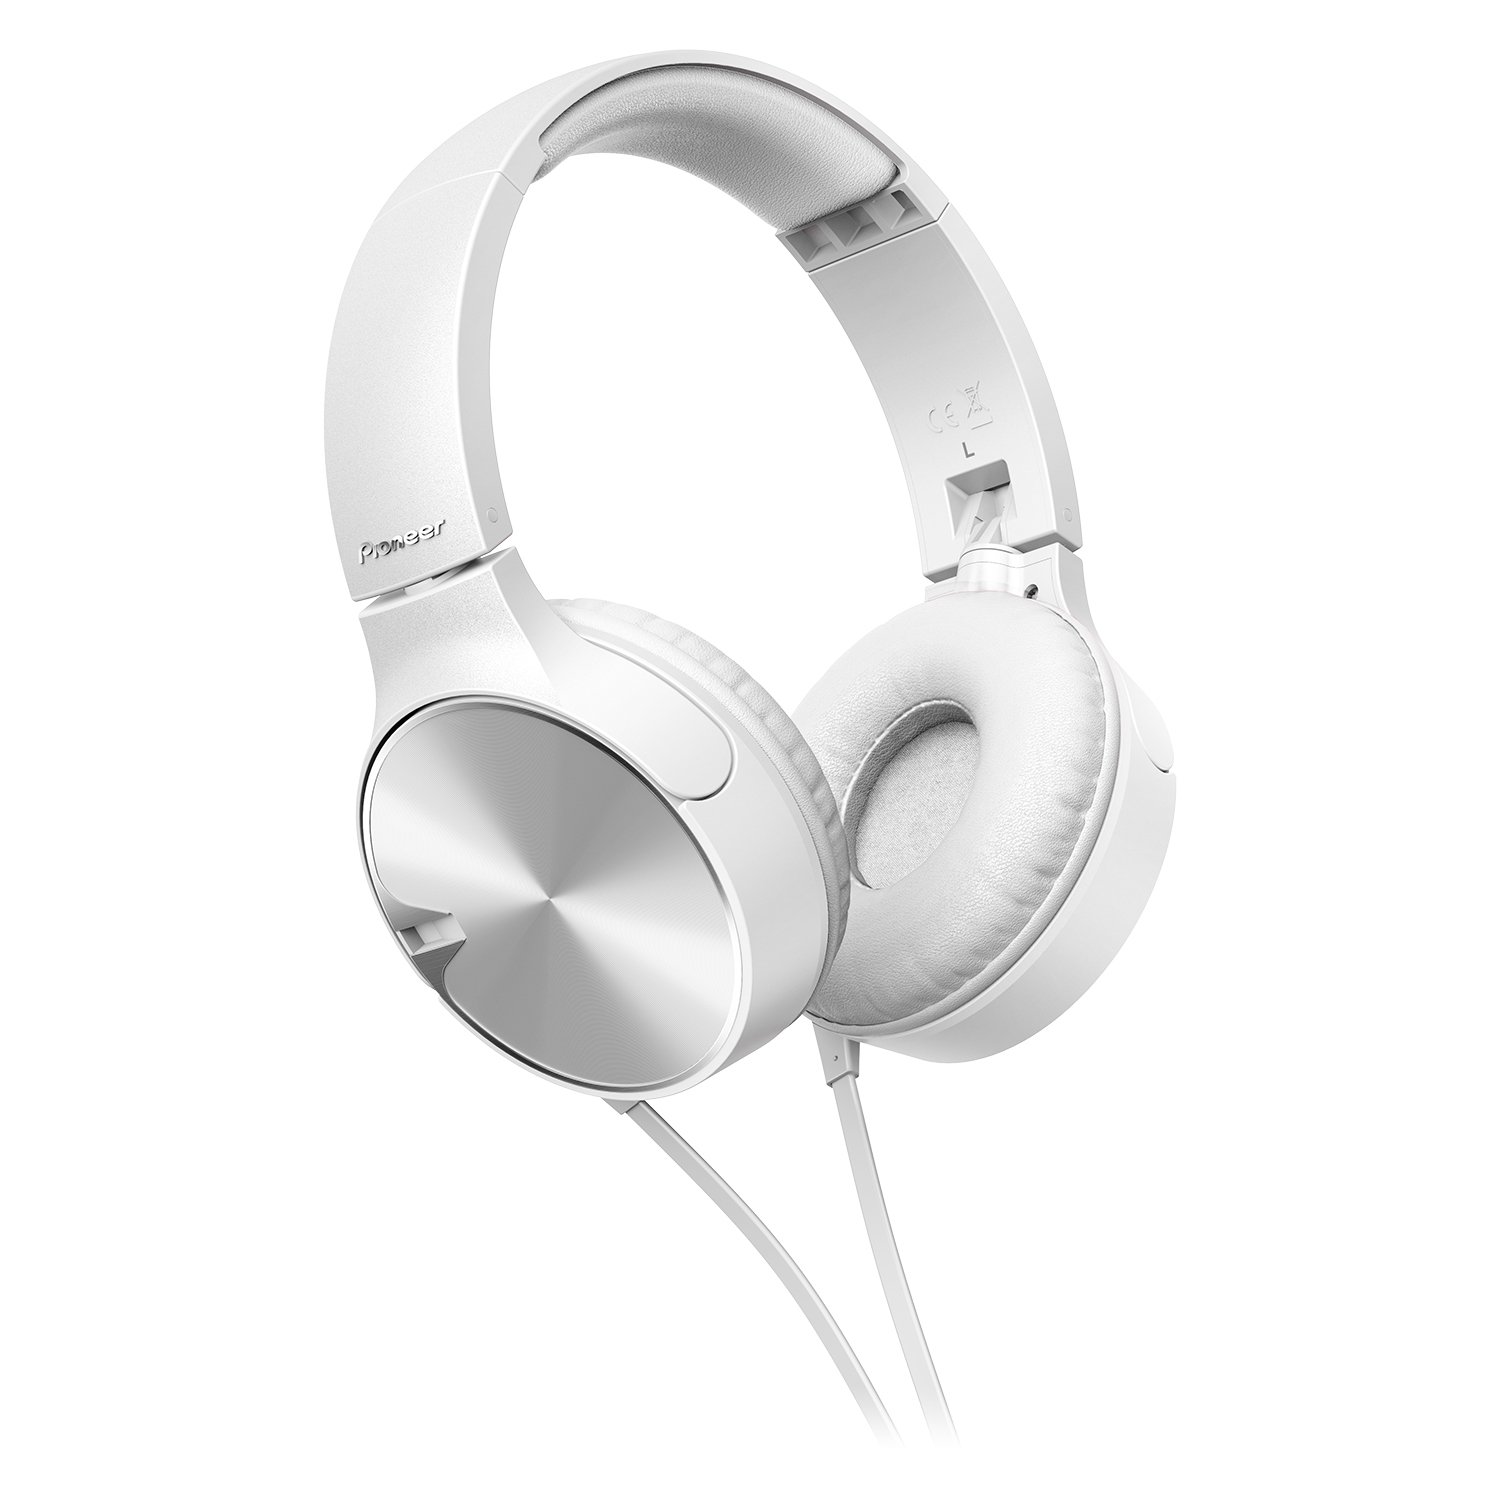 Auriculares Pioneer SE-MJ722T solo 13€